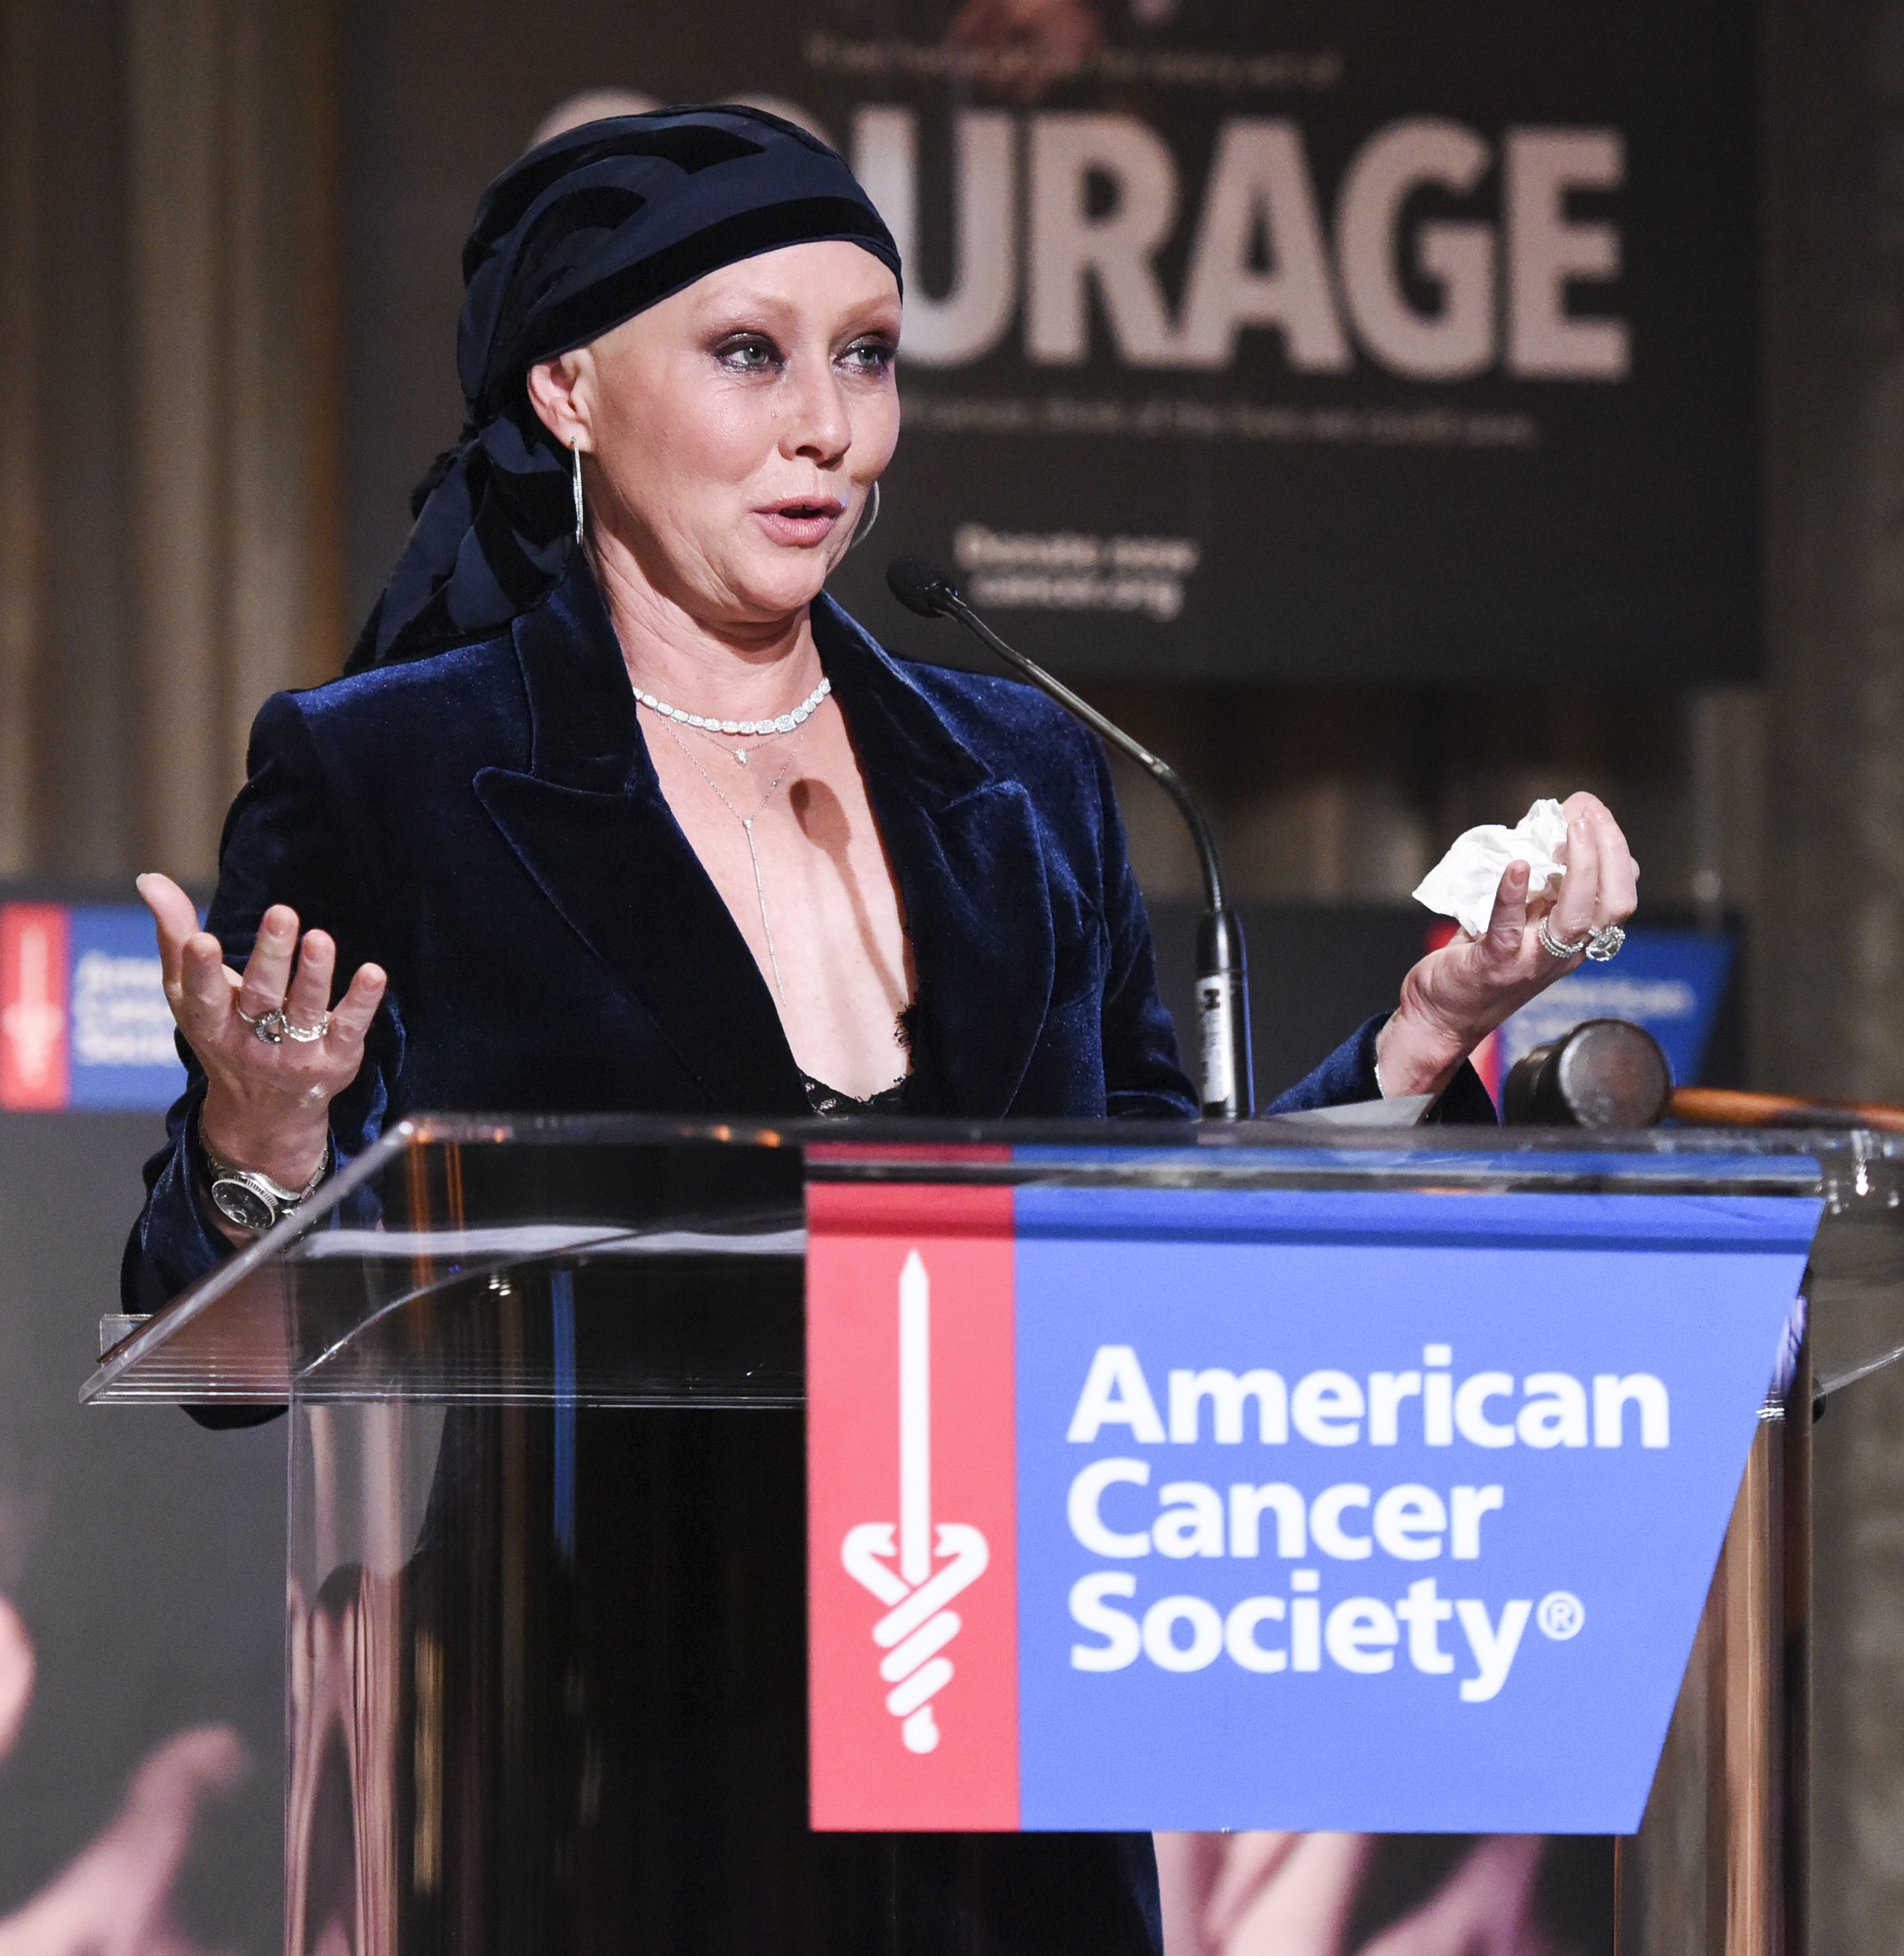 Actress Shannen Doherty speaks on stage at American Cancer Society's Giants of Science Los Angeles Gala on November 5, 2016 in Los Angeles, California | Source: Getty Images